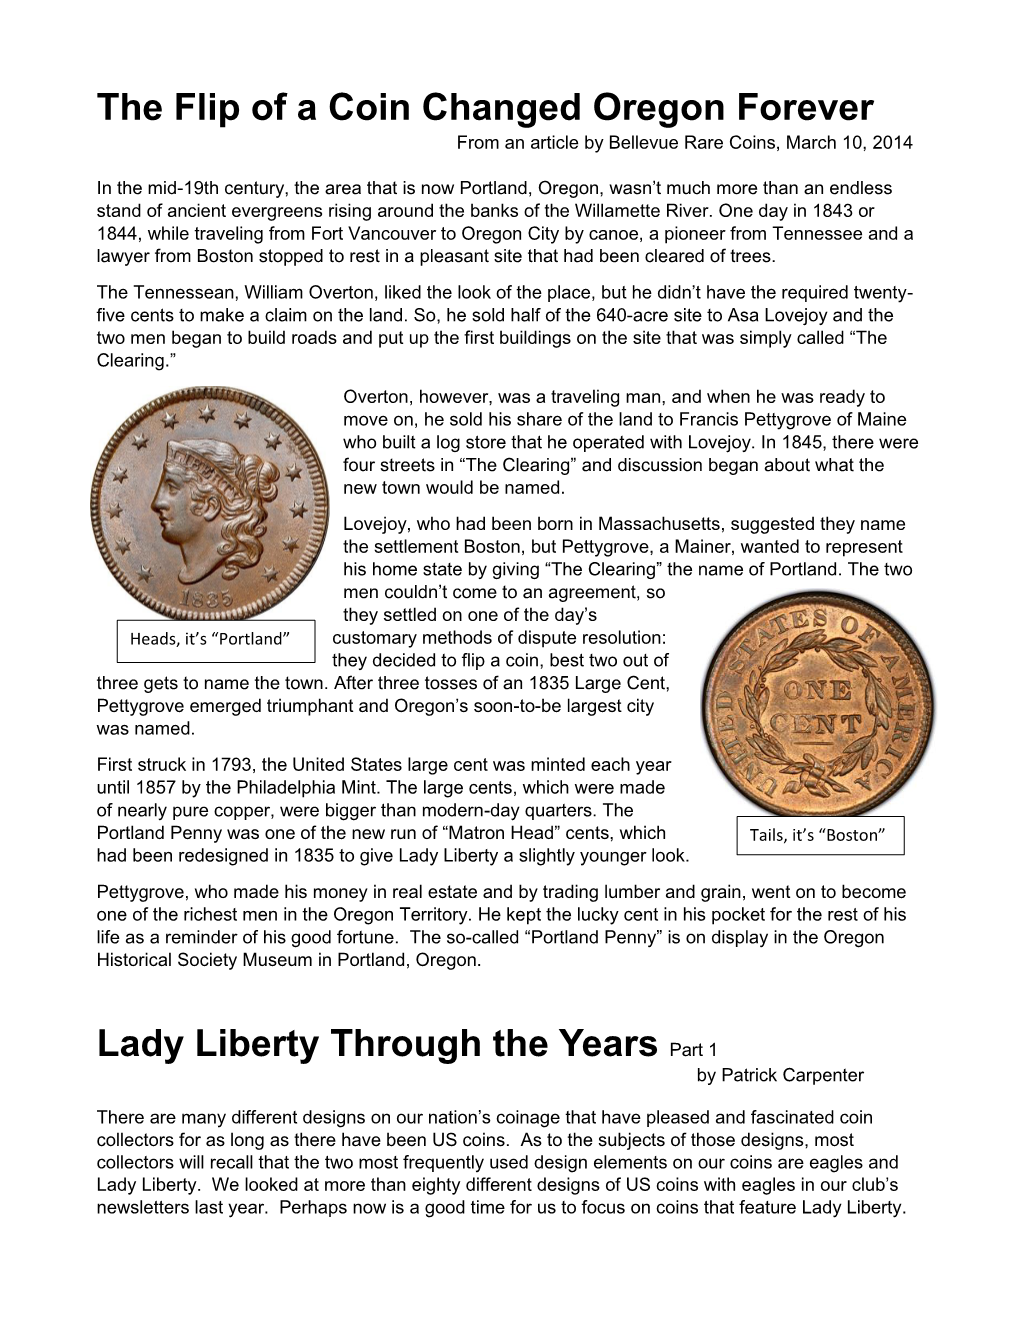 The Flip of a Coin Changed Oregon Forever from an Article by Bellevue Rare Coins, March 10, 2014